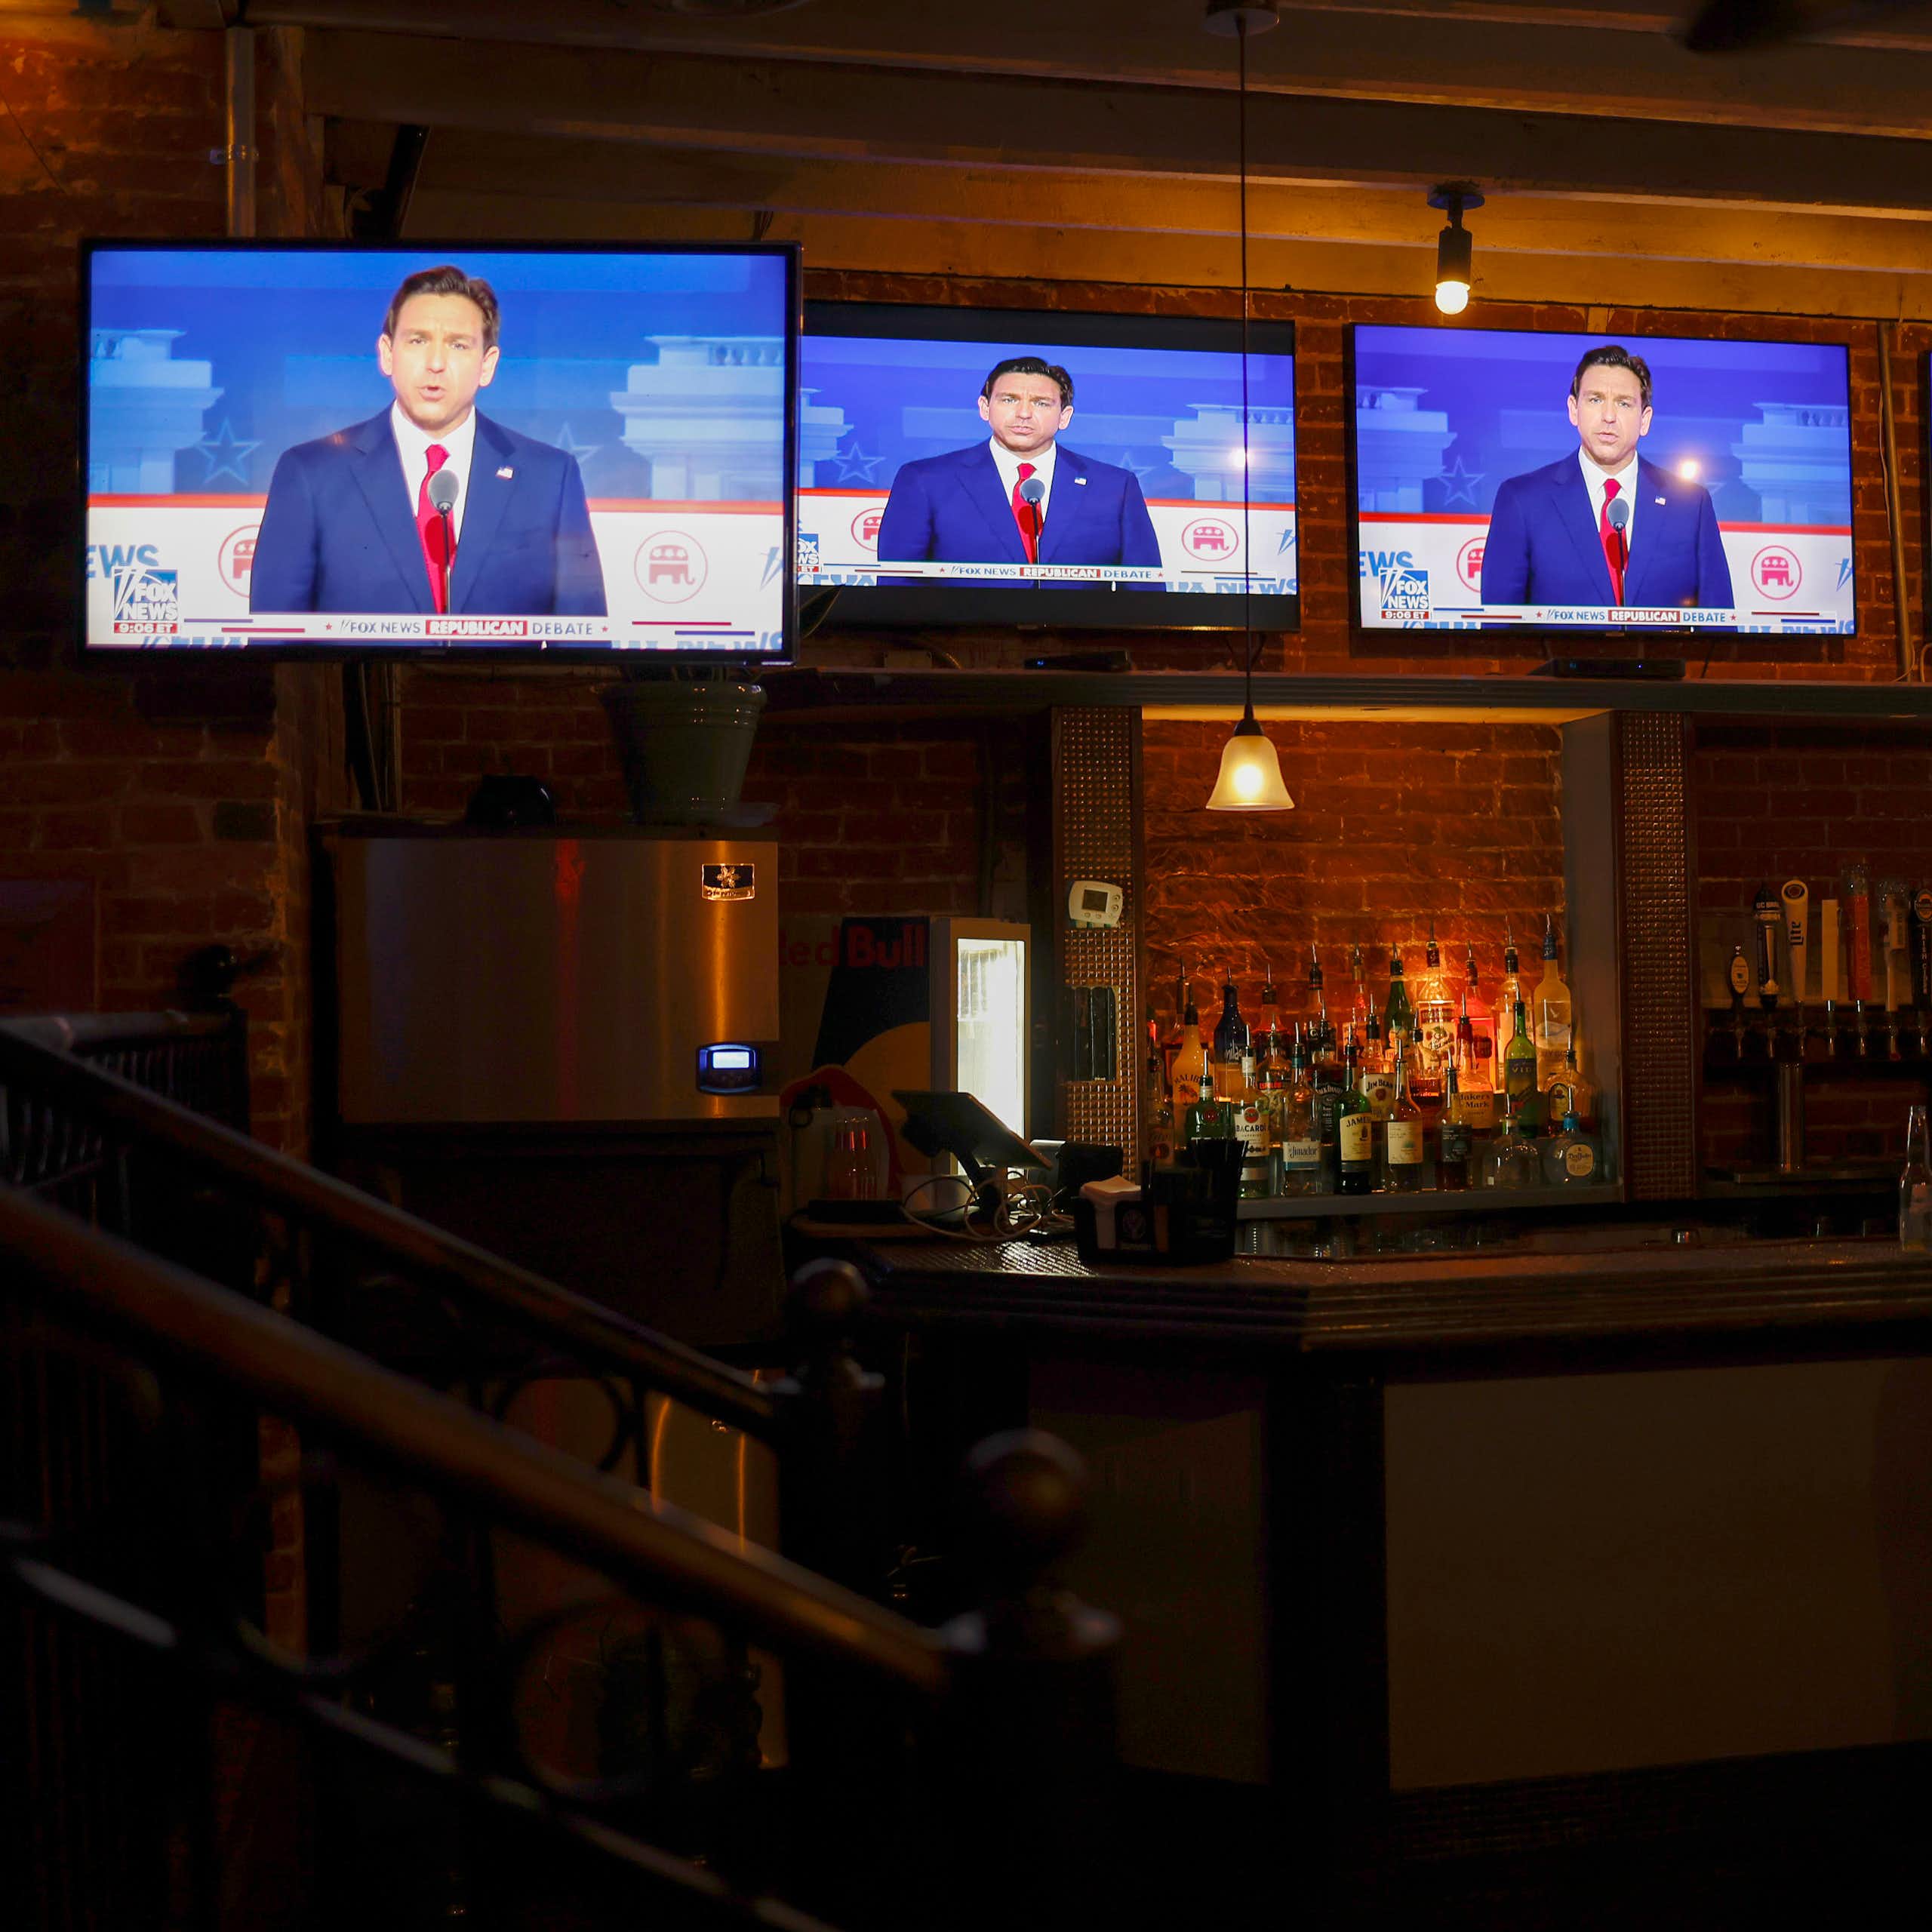 Five tv screens suspended over a dark bar, with a man shown talking in them.